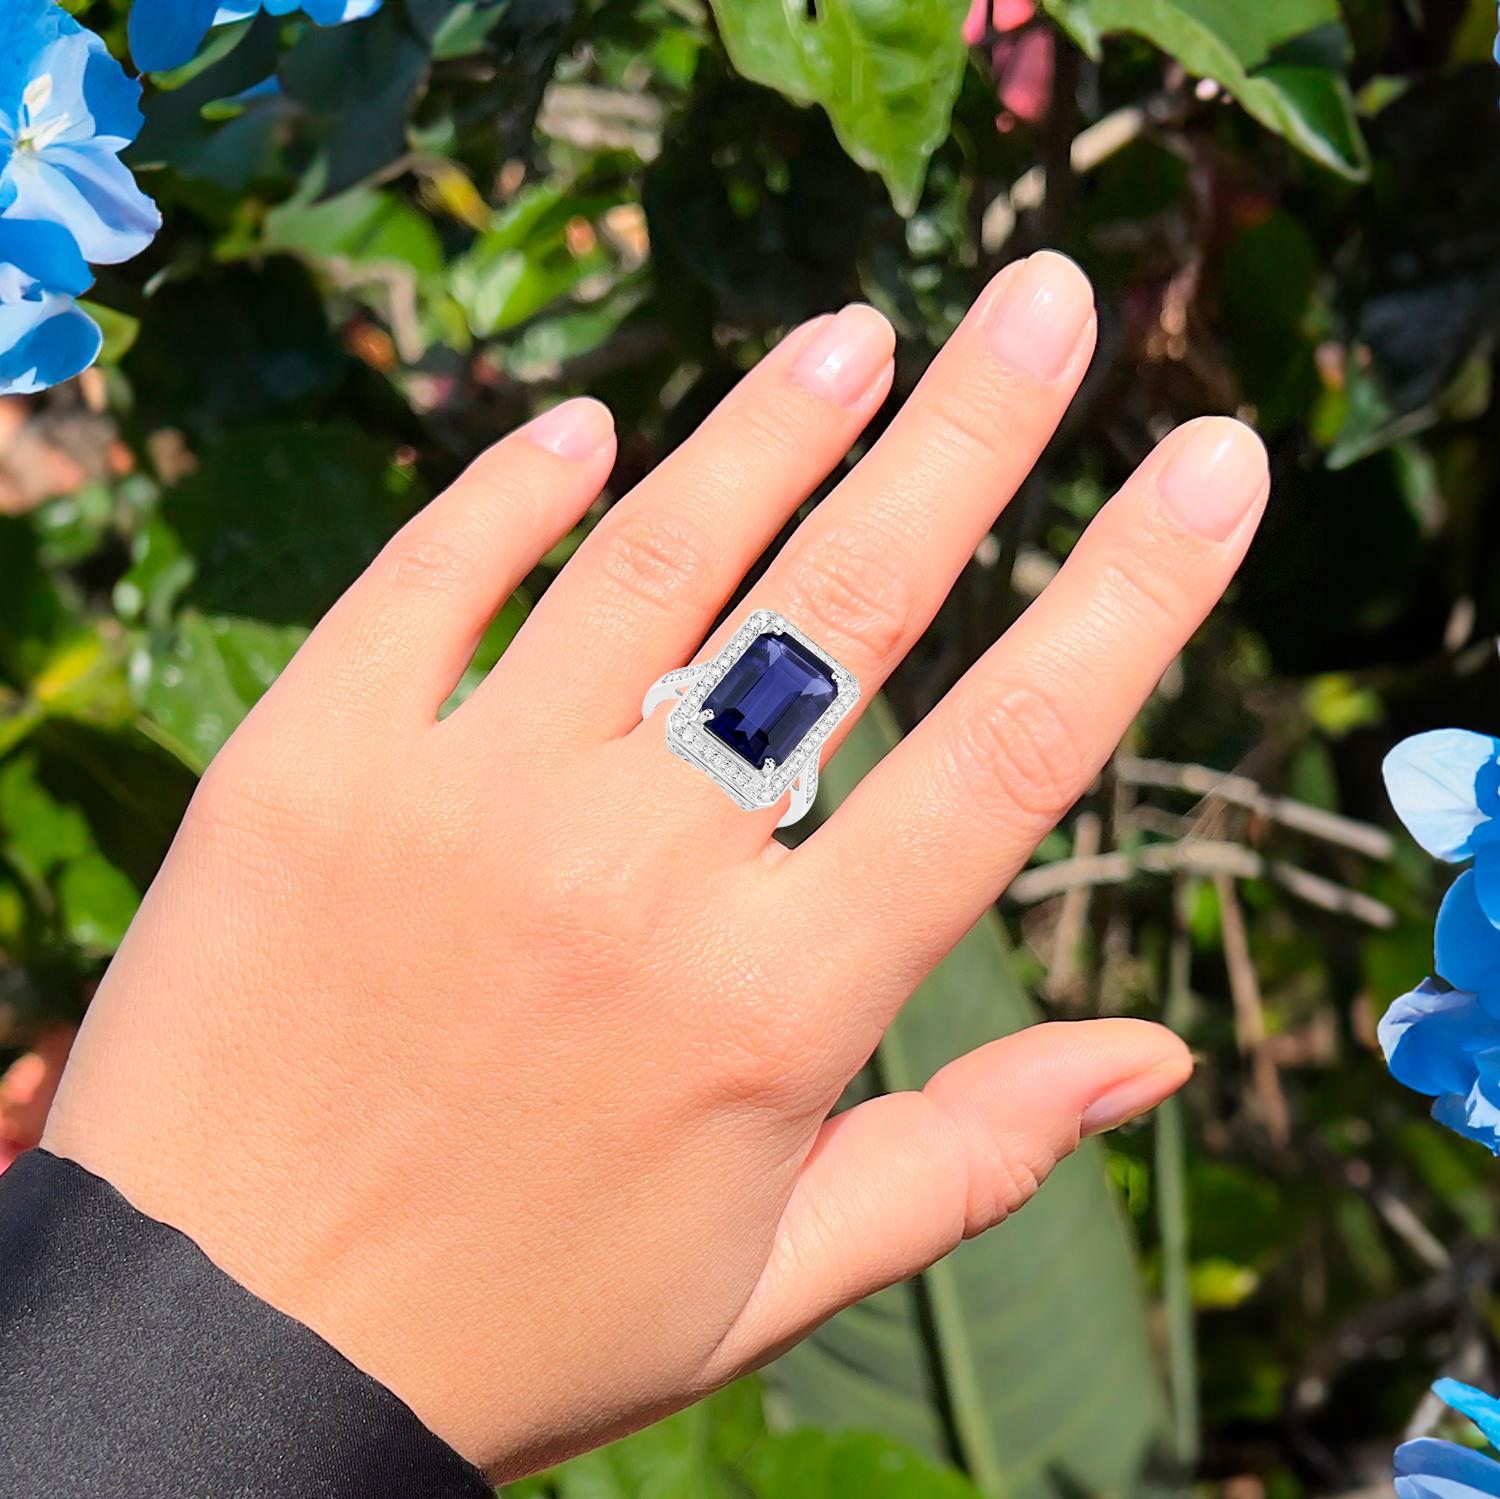 Emerald Cut Iolite Cocktail Ring Diamond Halo 6.45 Carats 14K White Gold For Sale